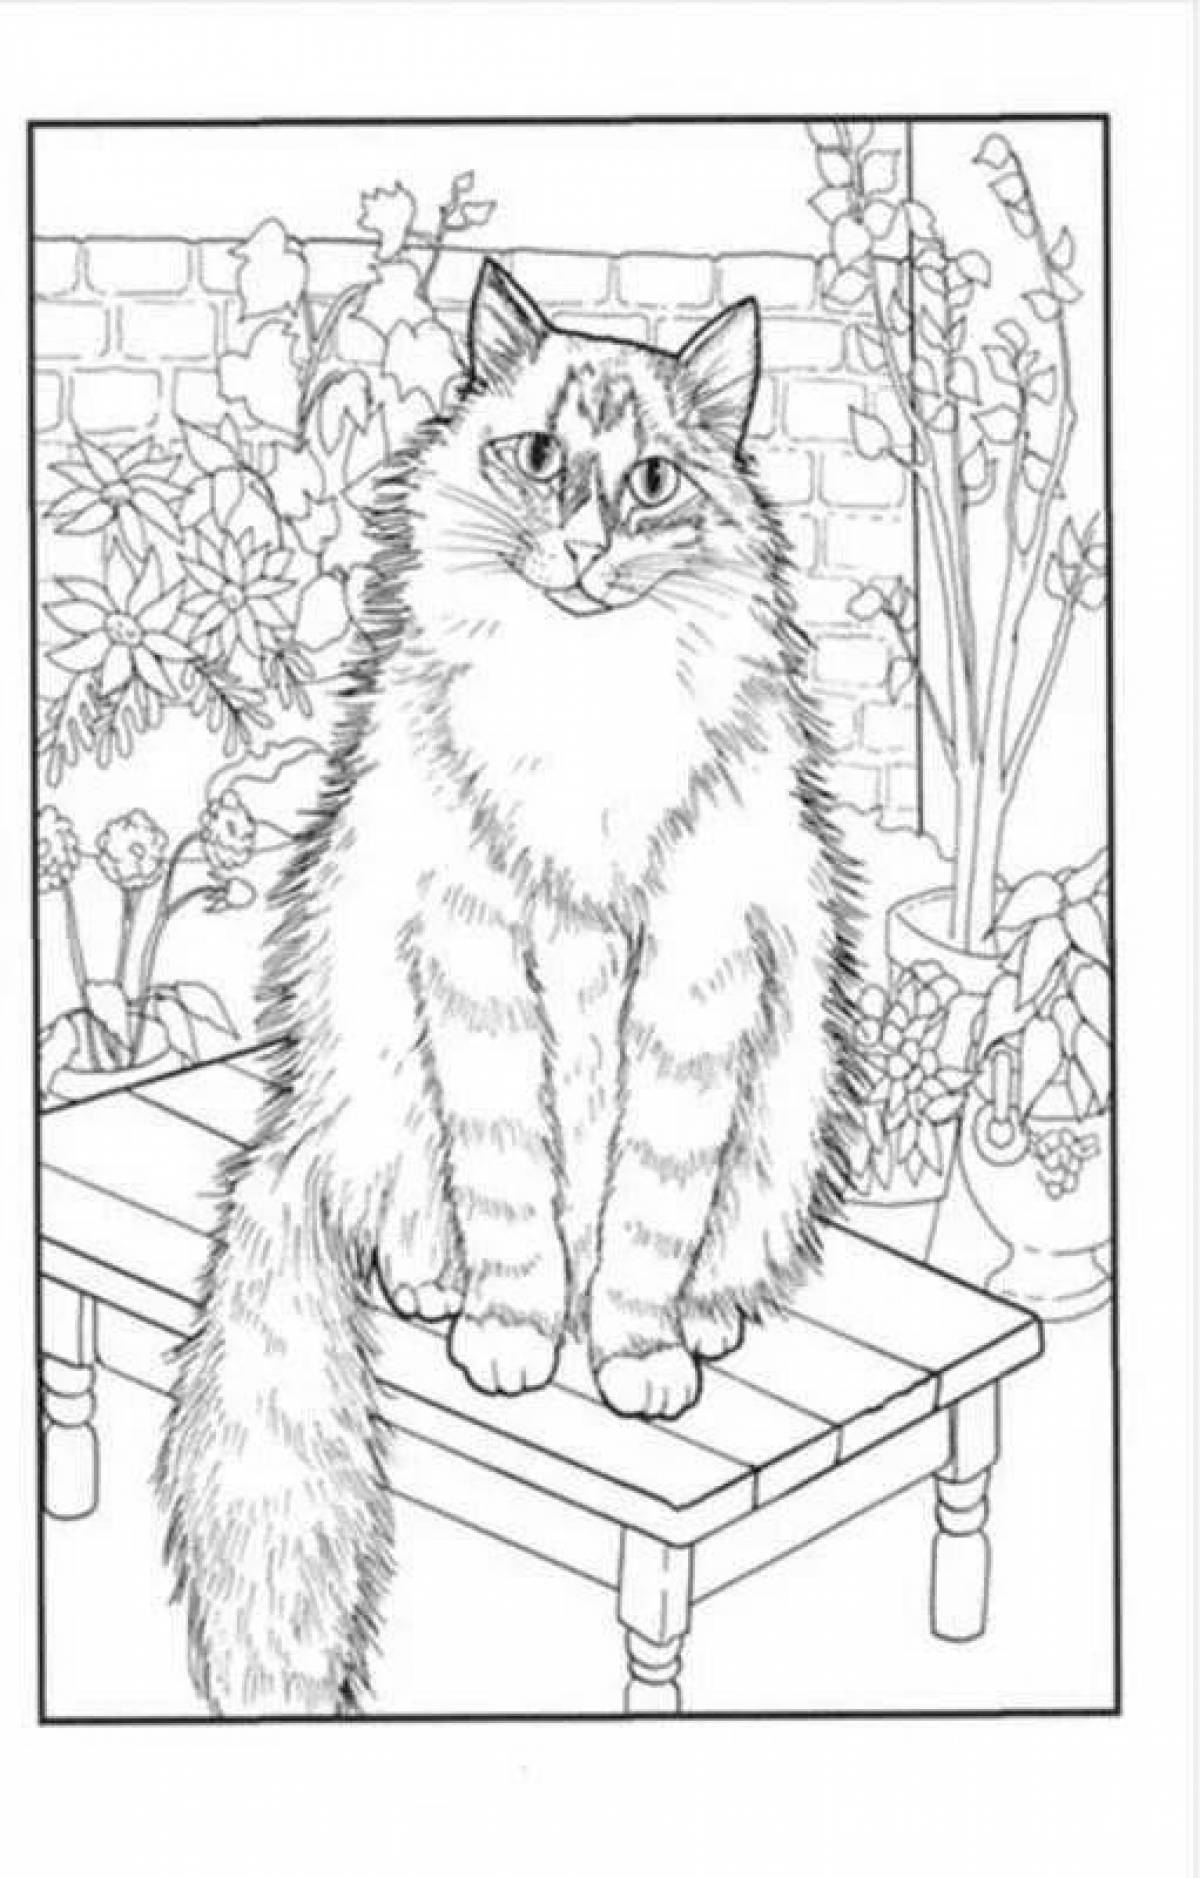 Curious siberian cat coloring page